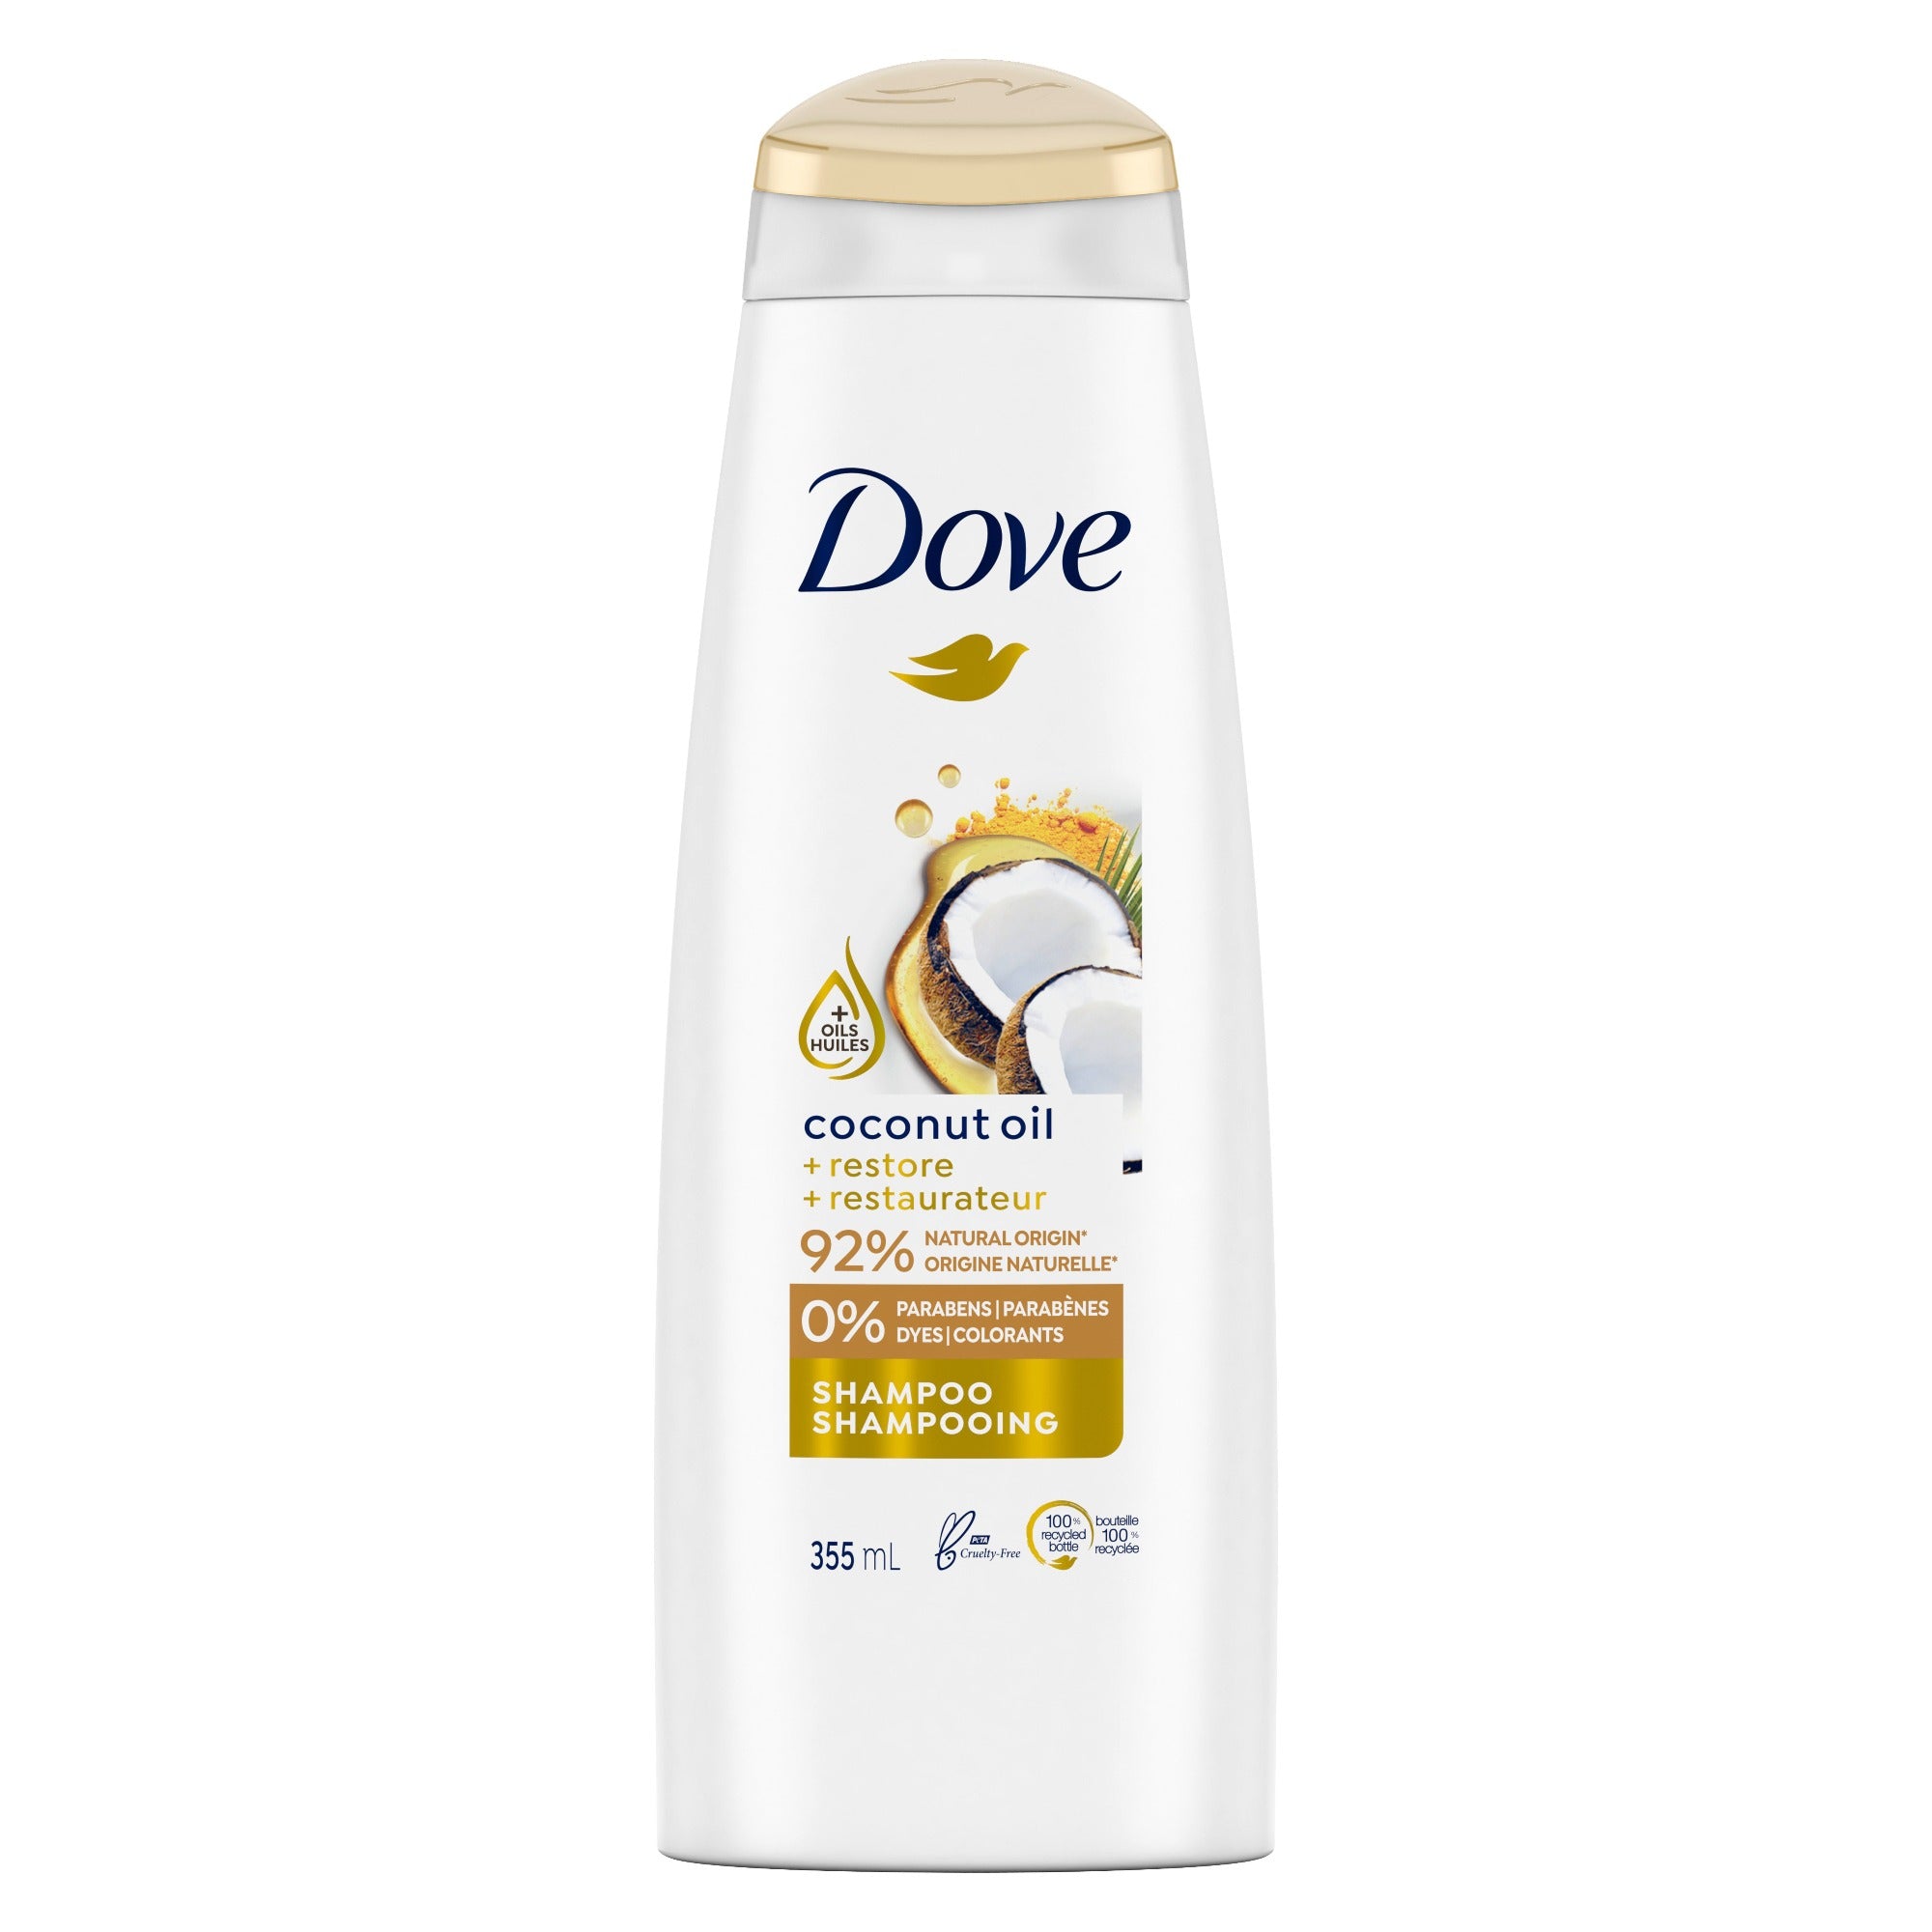 Showing the front angle view of the Dove Nourishing Secrets Coconut Oil Shampoo 355mL product.